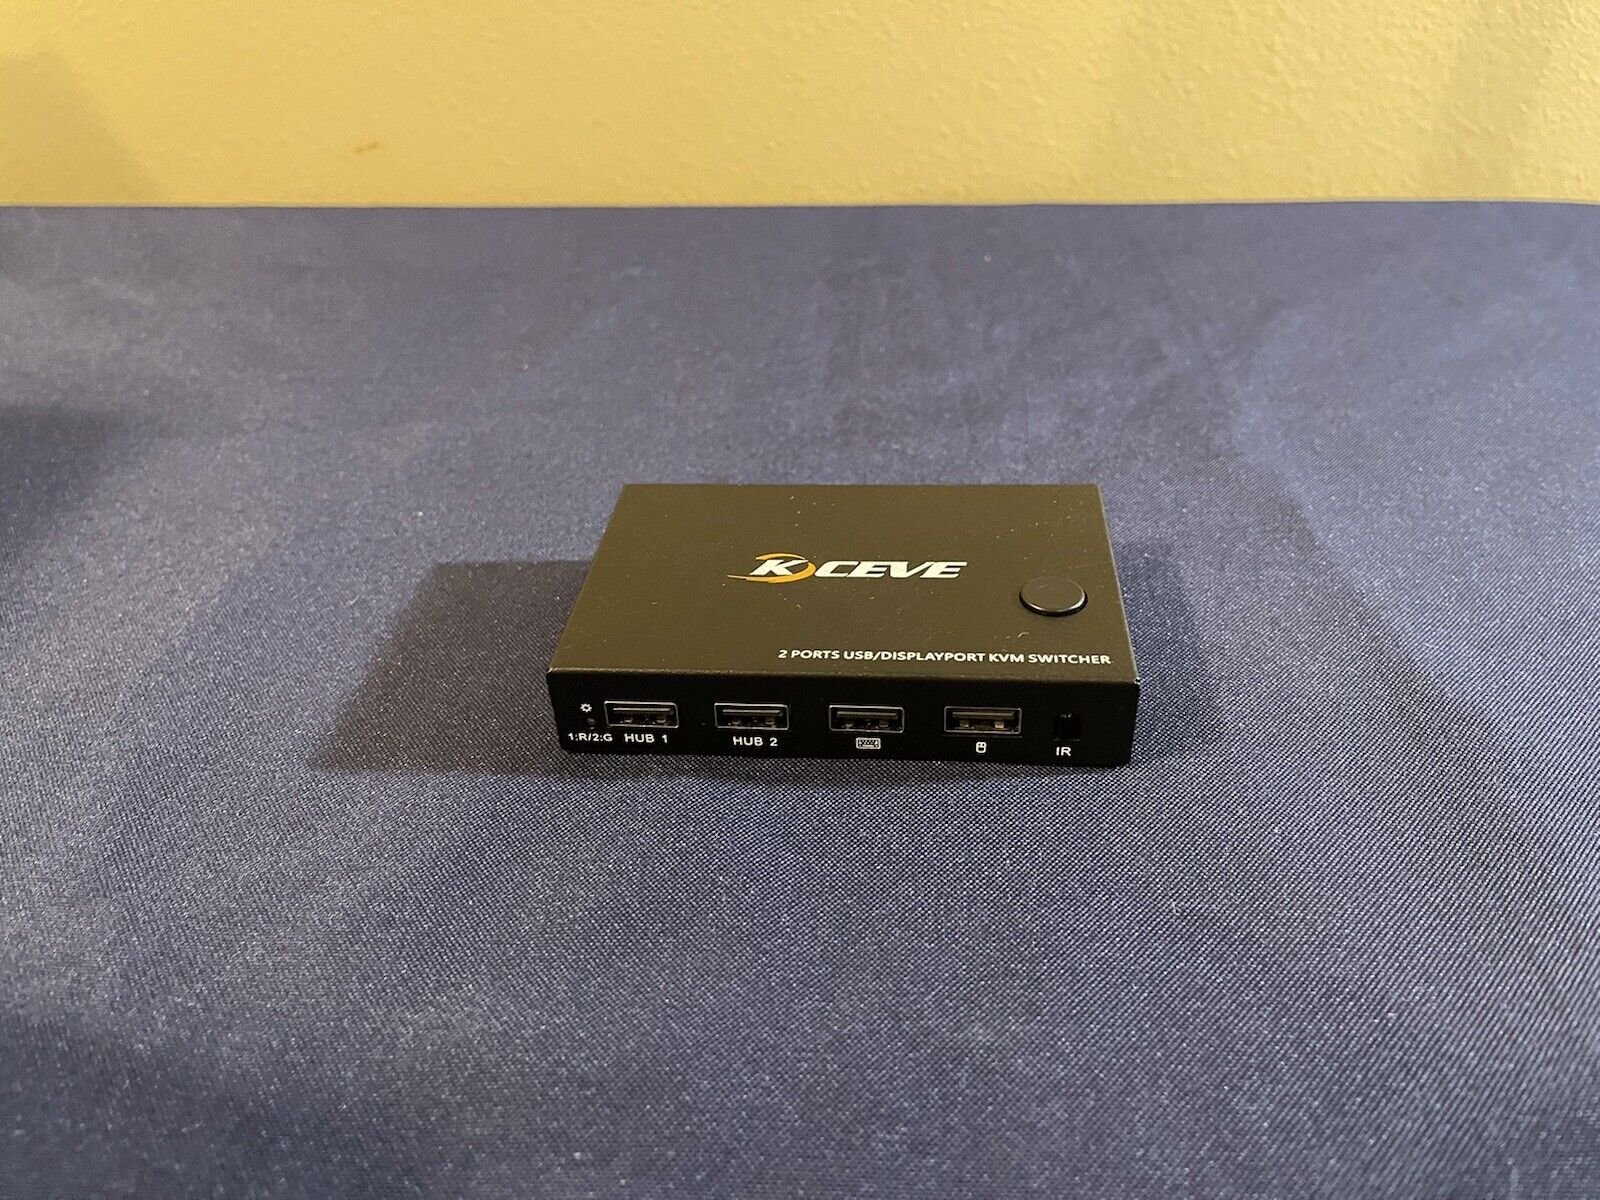 KCEVE HDMI KVM Switch, 2 Port USB and HDMI 4K@60Hz Switch Adapter Box for 2 Comp